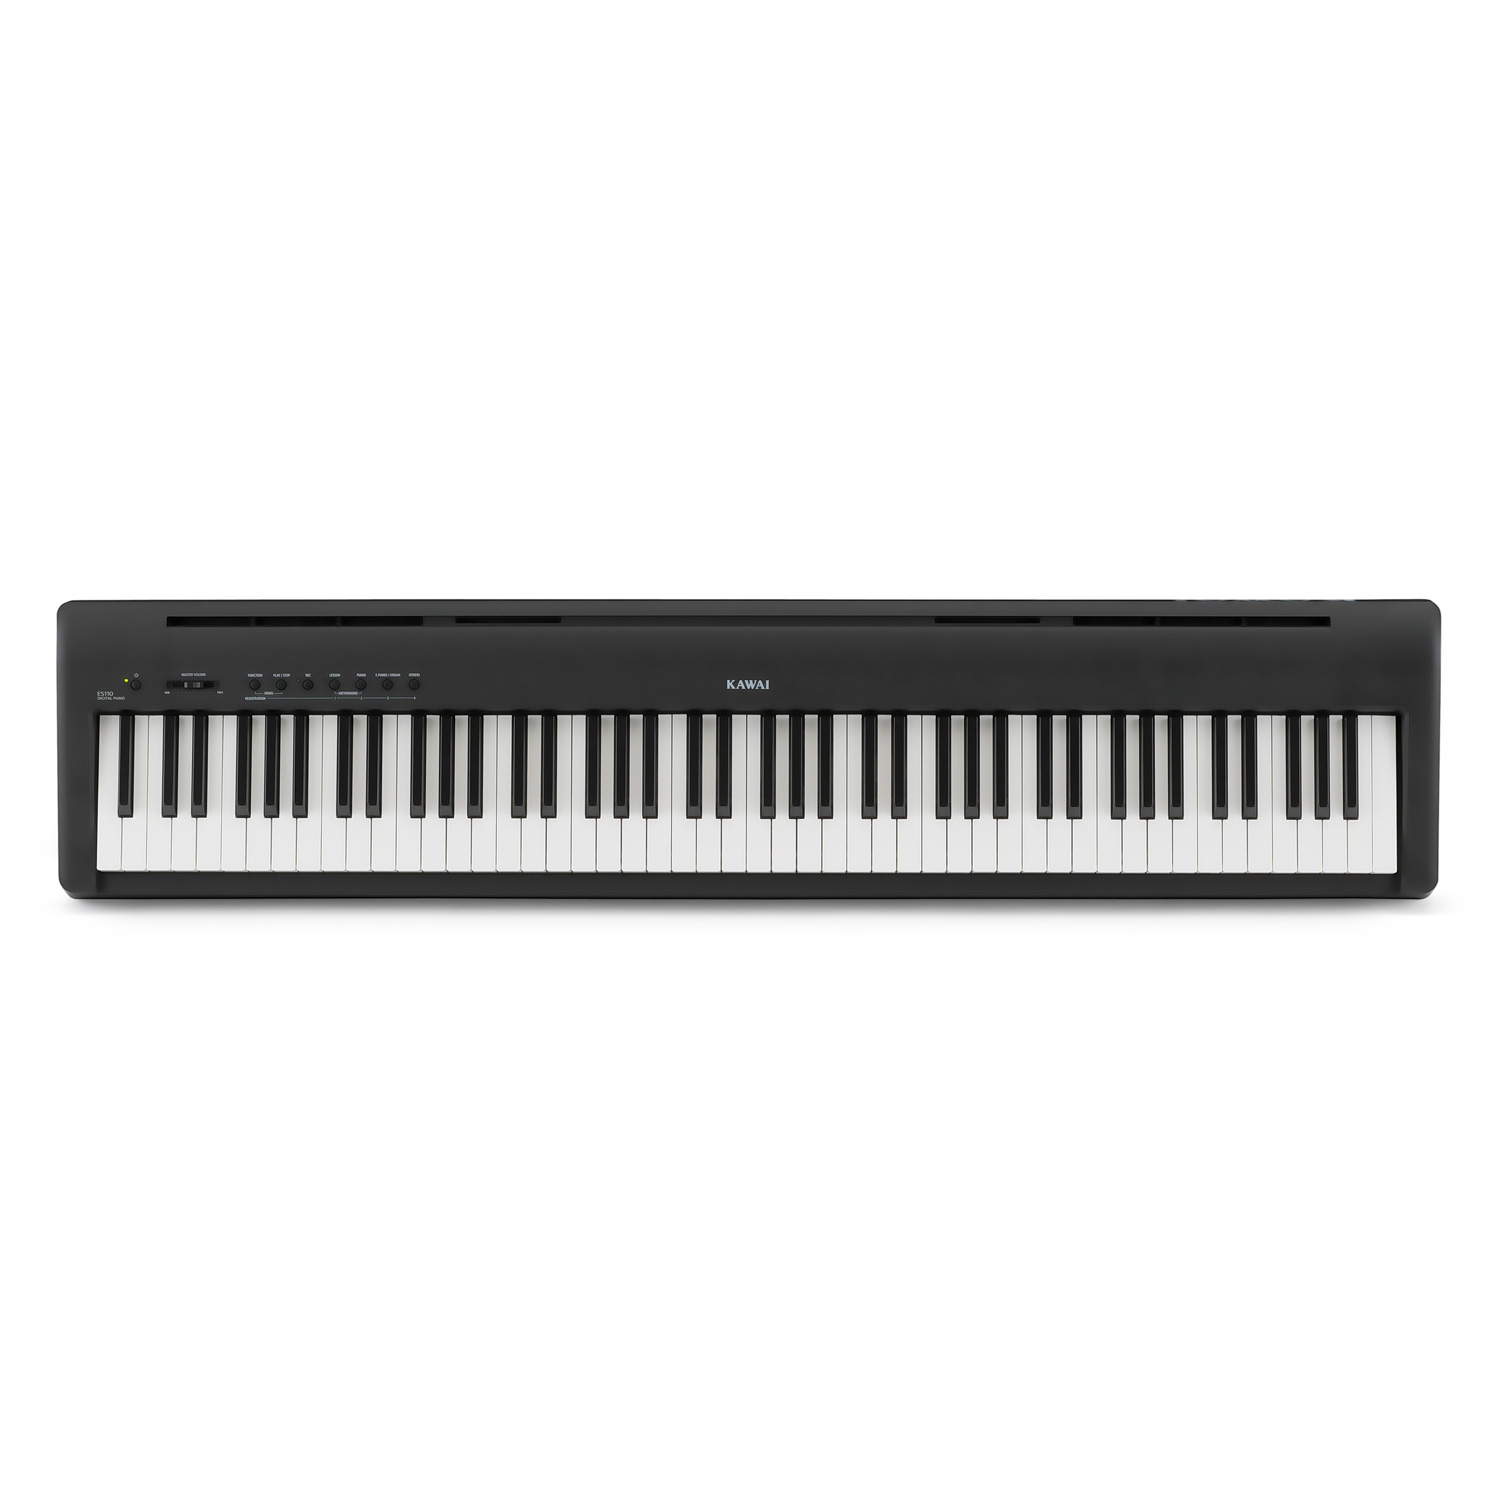 RUIXFRU Digital Portable Foldable Soft Electronic Piano Digital Music Instrument 88 Keys Roll Up Electronic Keyboard Piano Kids Children Beginner Practice Practice Musical Gift 